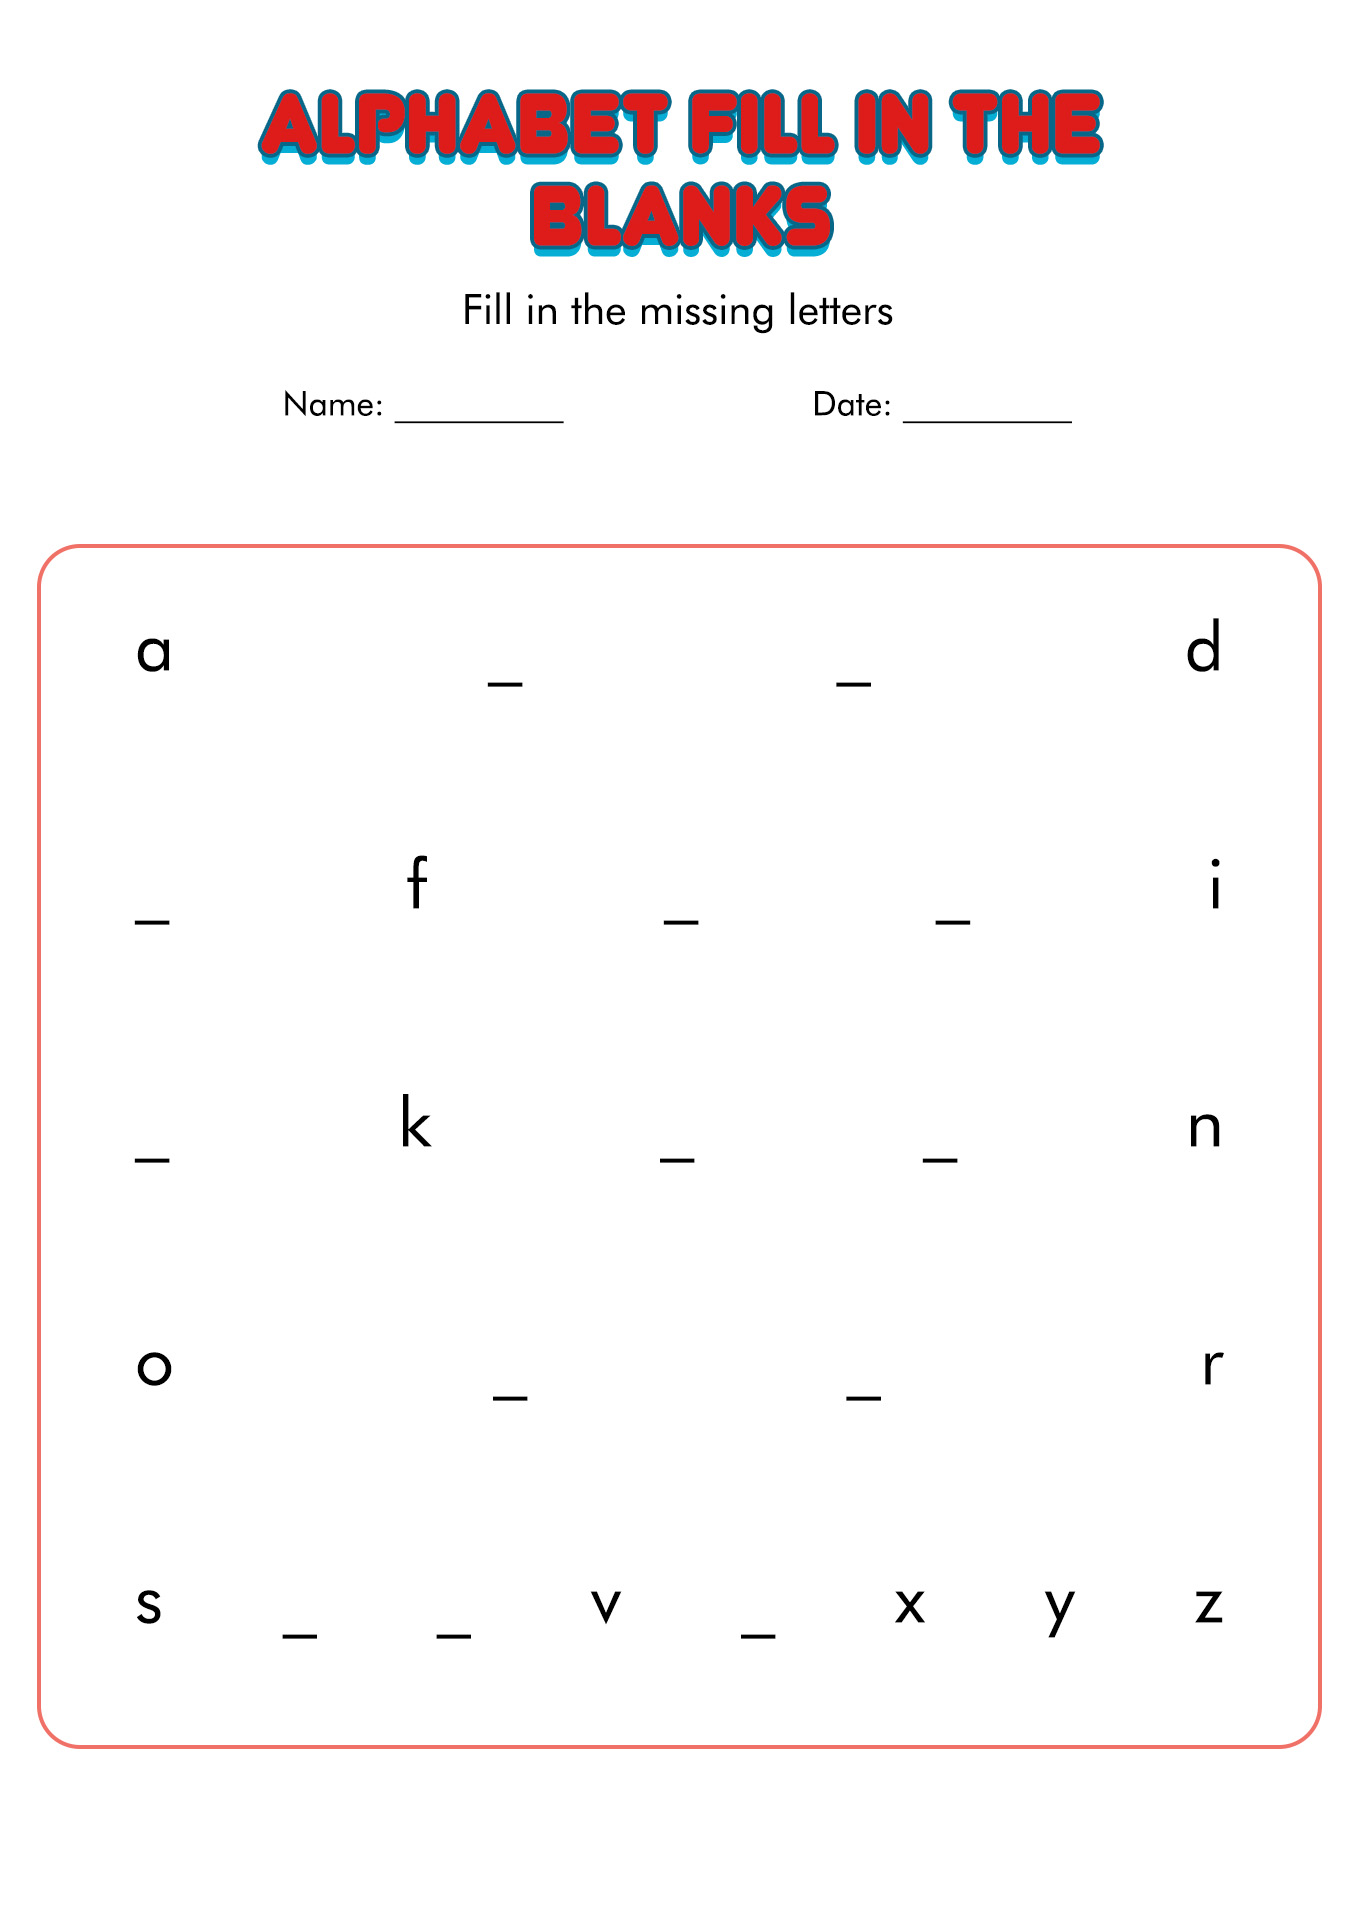 ABC Worksheet Fill in Blank Image